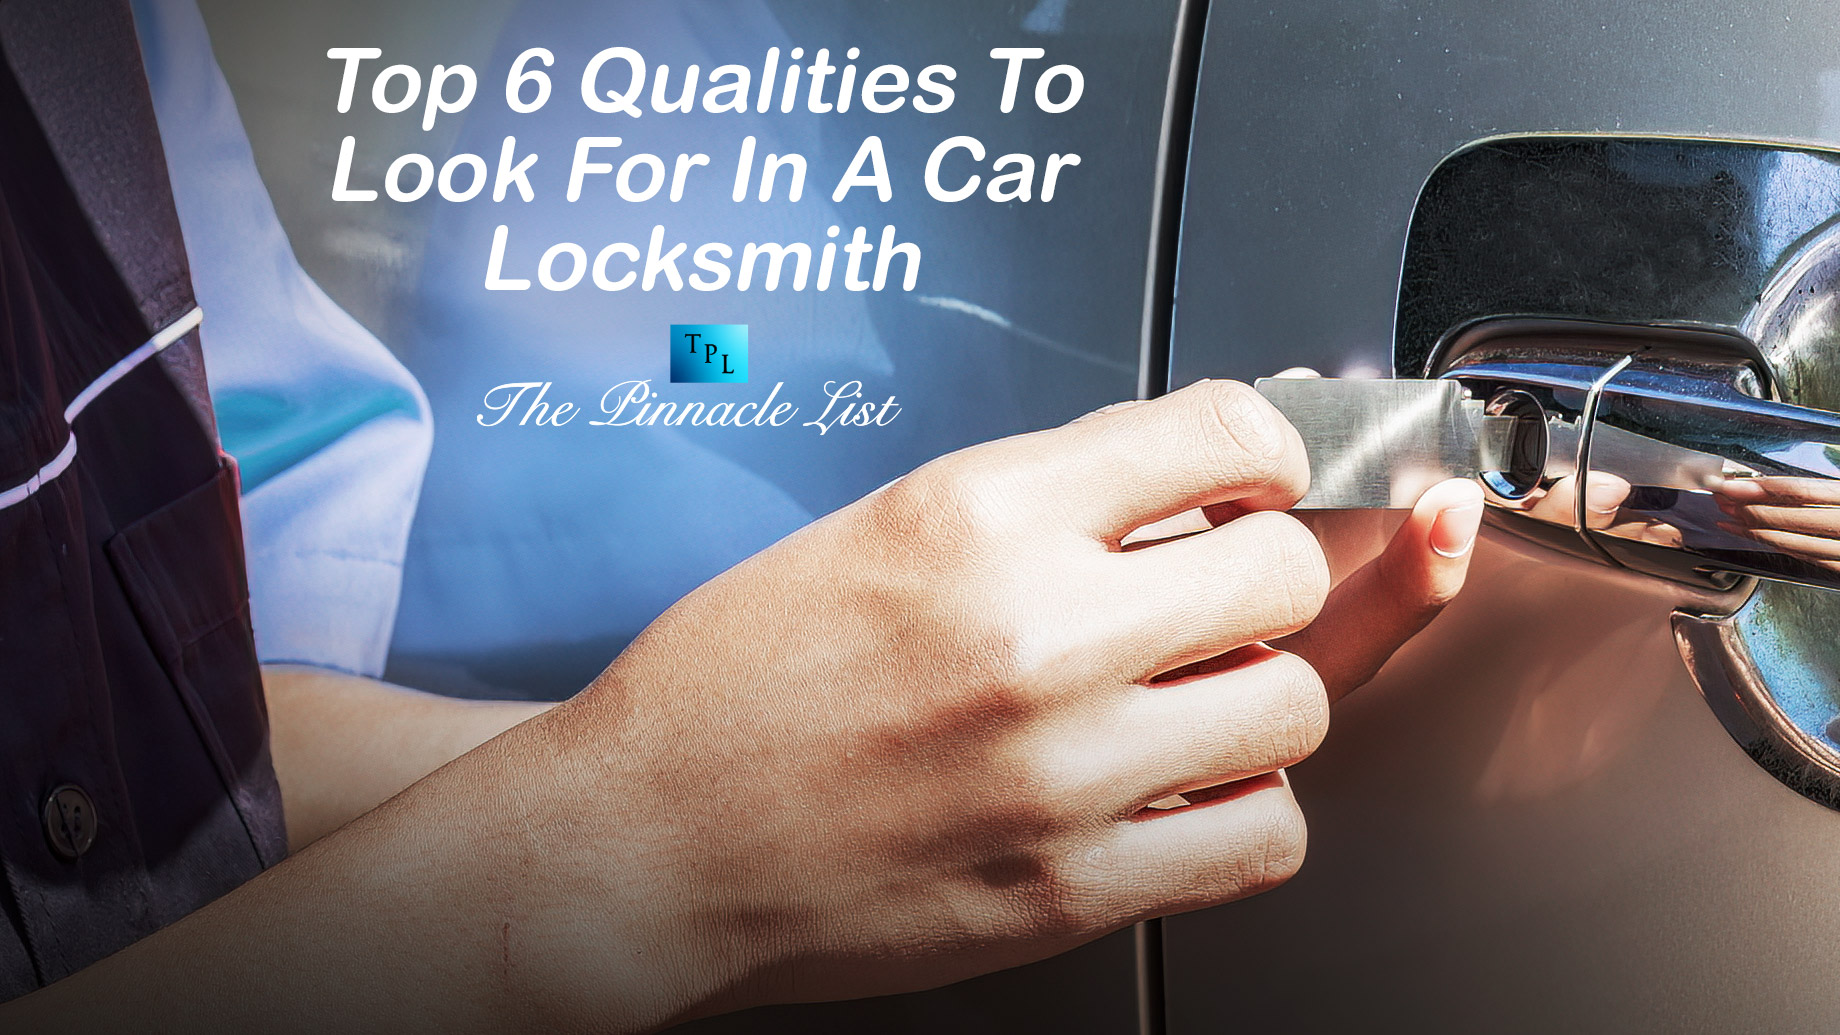 Top 6 Qualities To Look For In A Car Locksmith